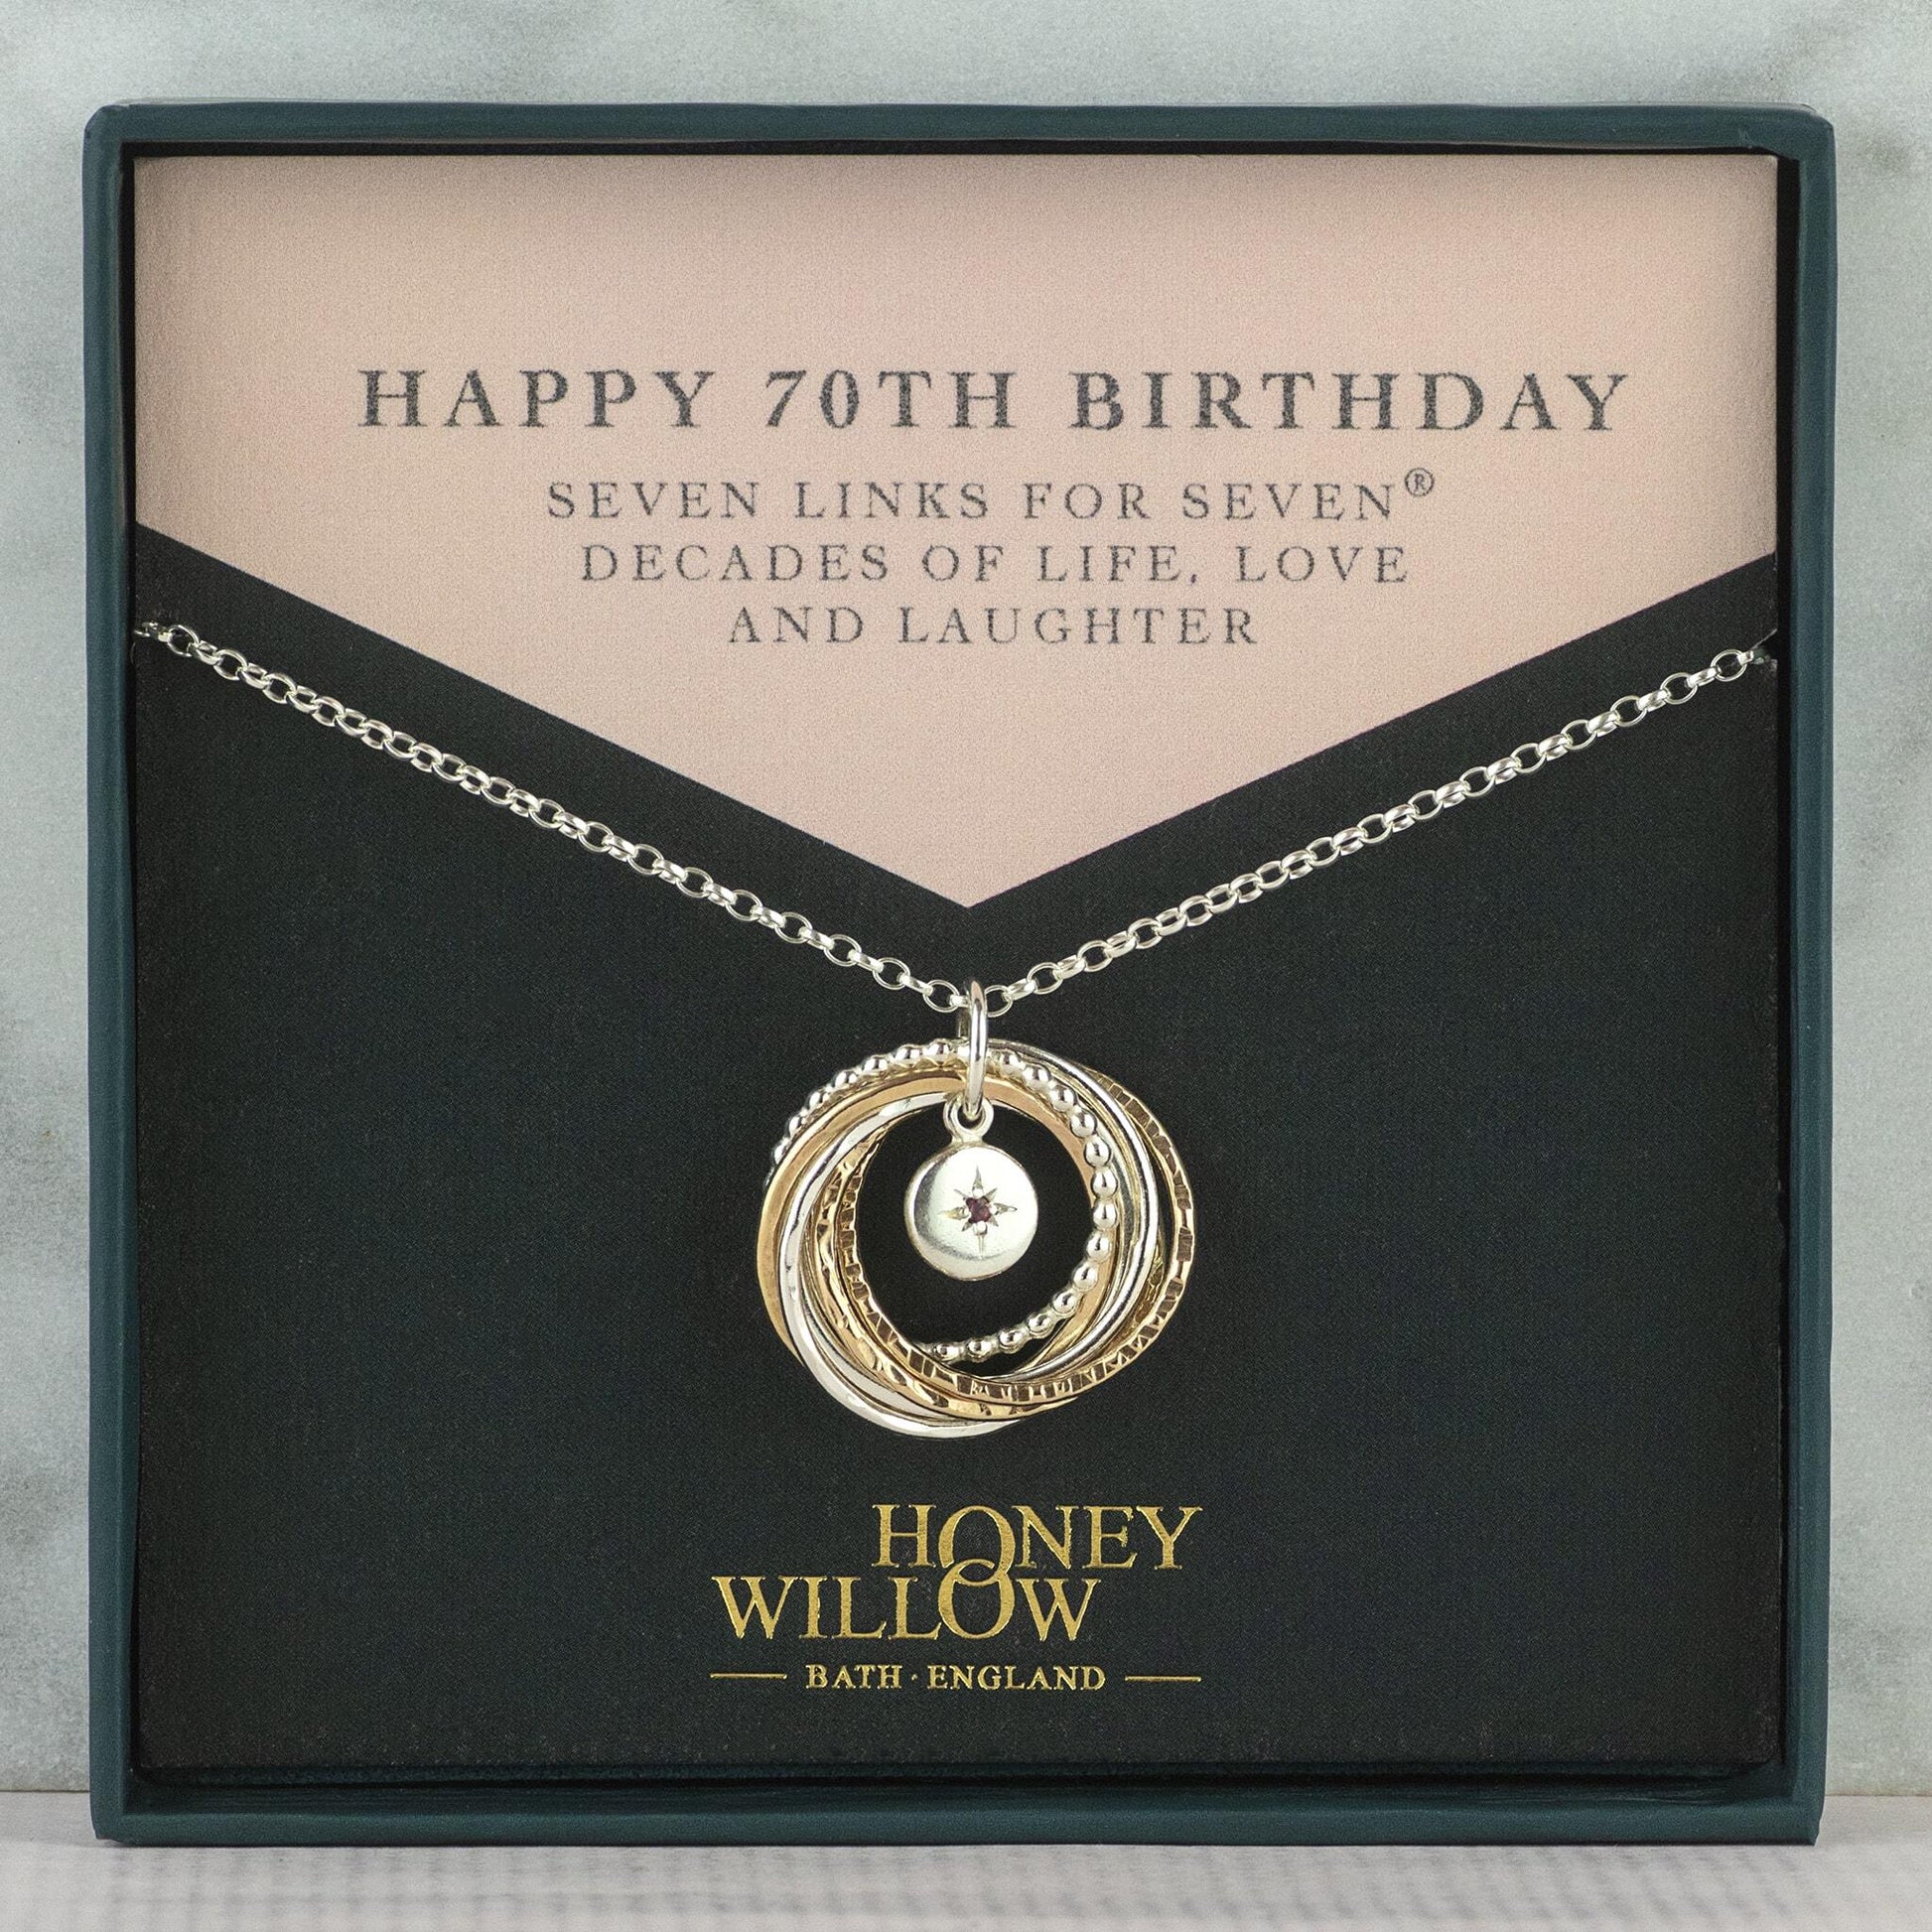 70th Birthday Birthstone Necklace - The Original 7 Links for 7 Decades Necklace - Silver & Gold